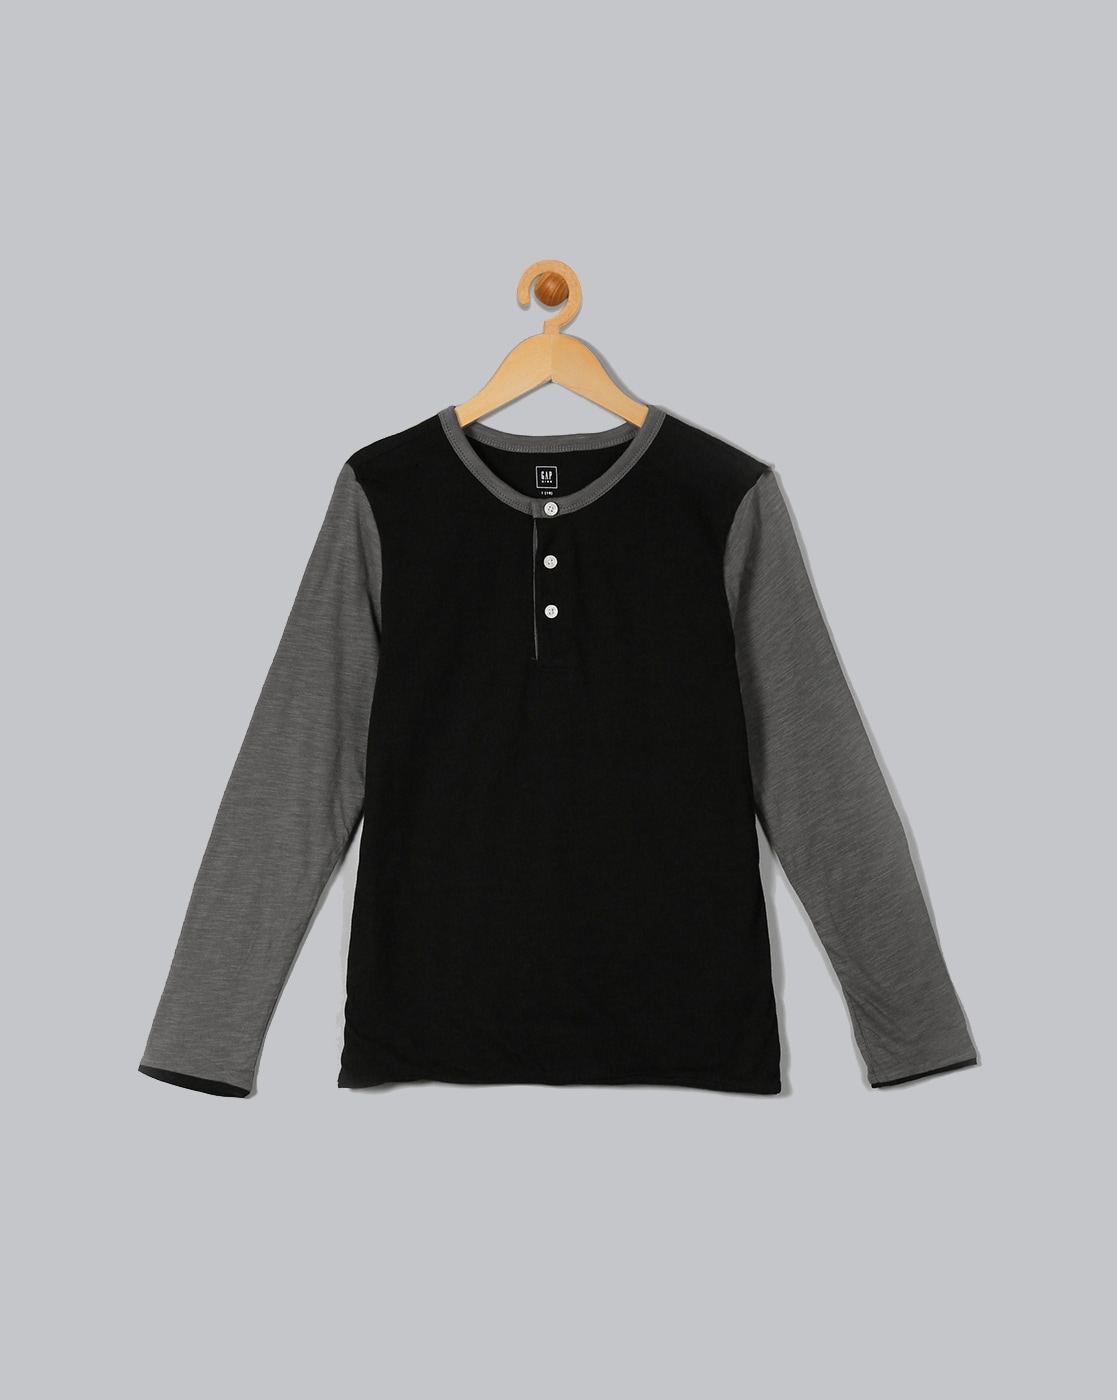 double layer t shirt online india